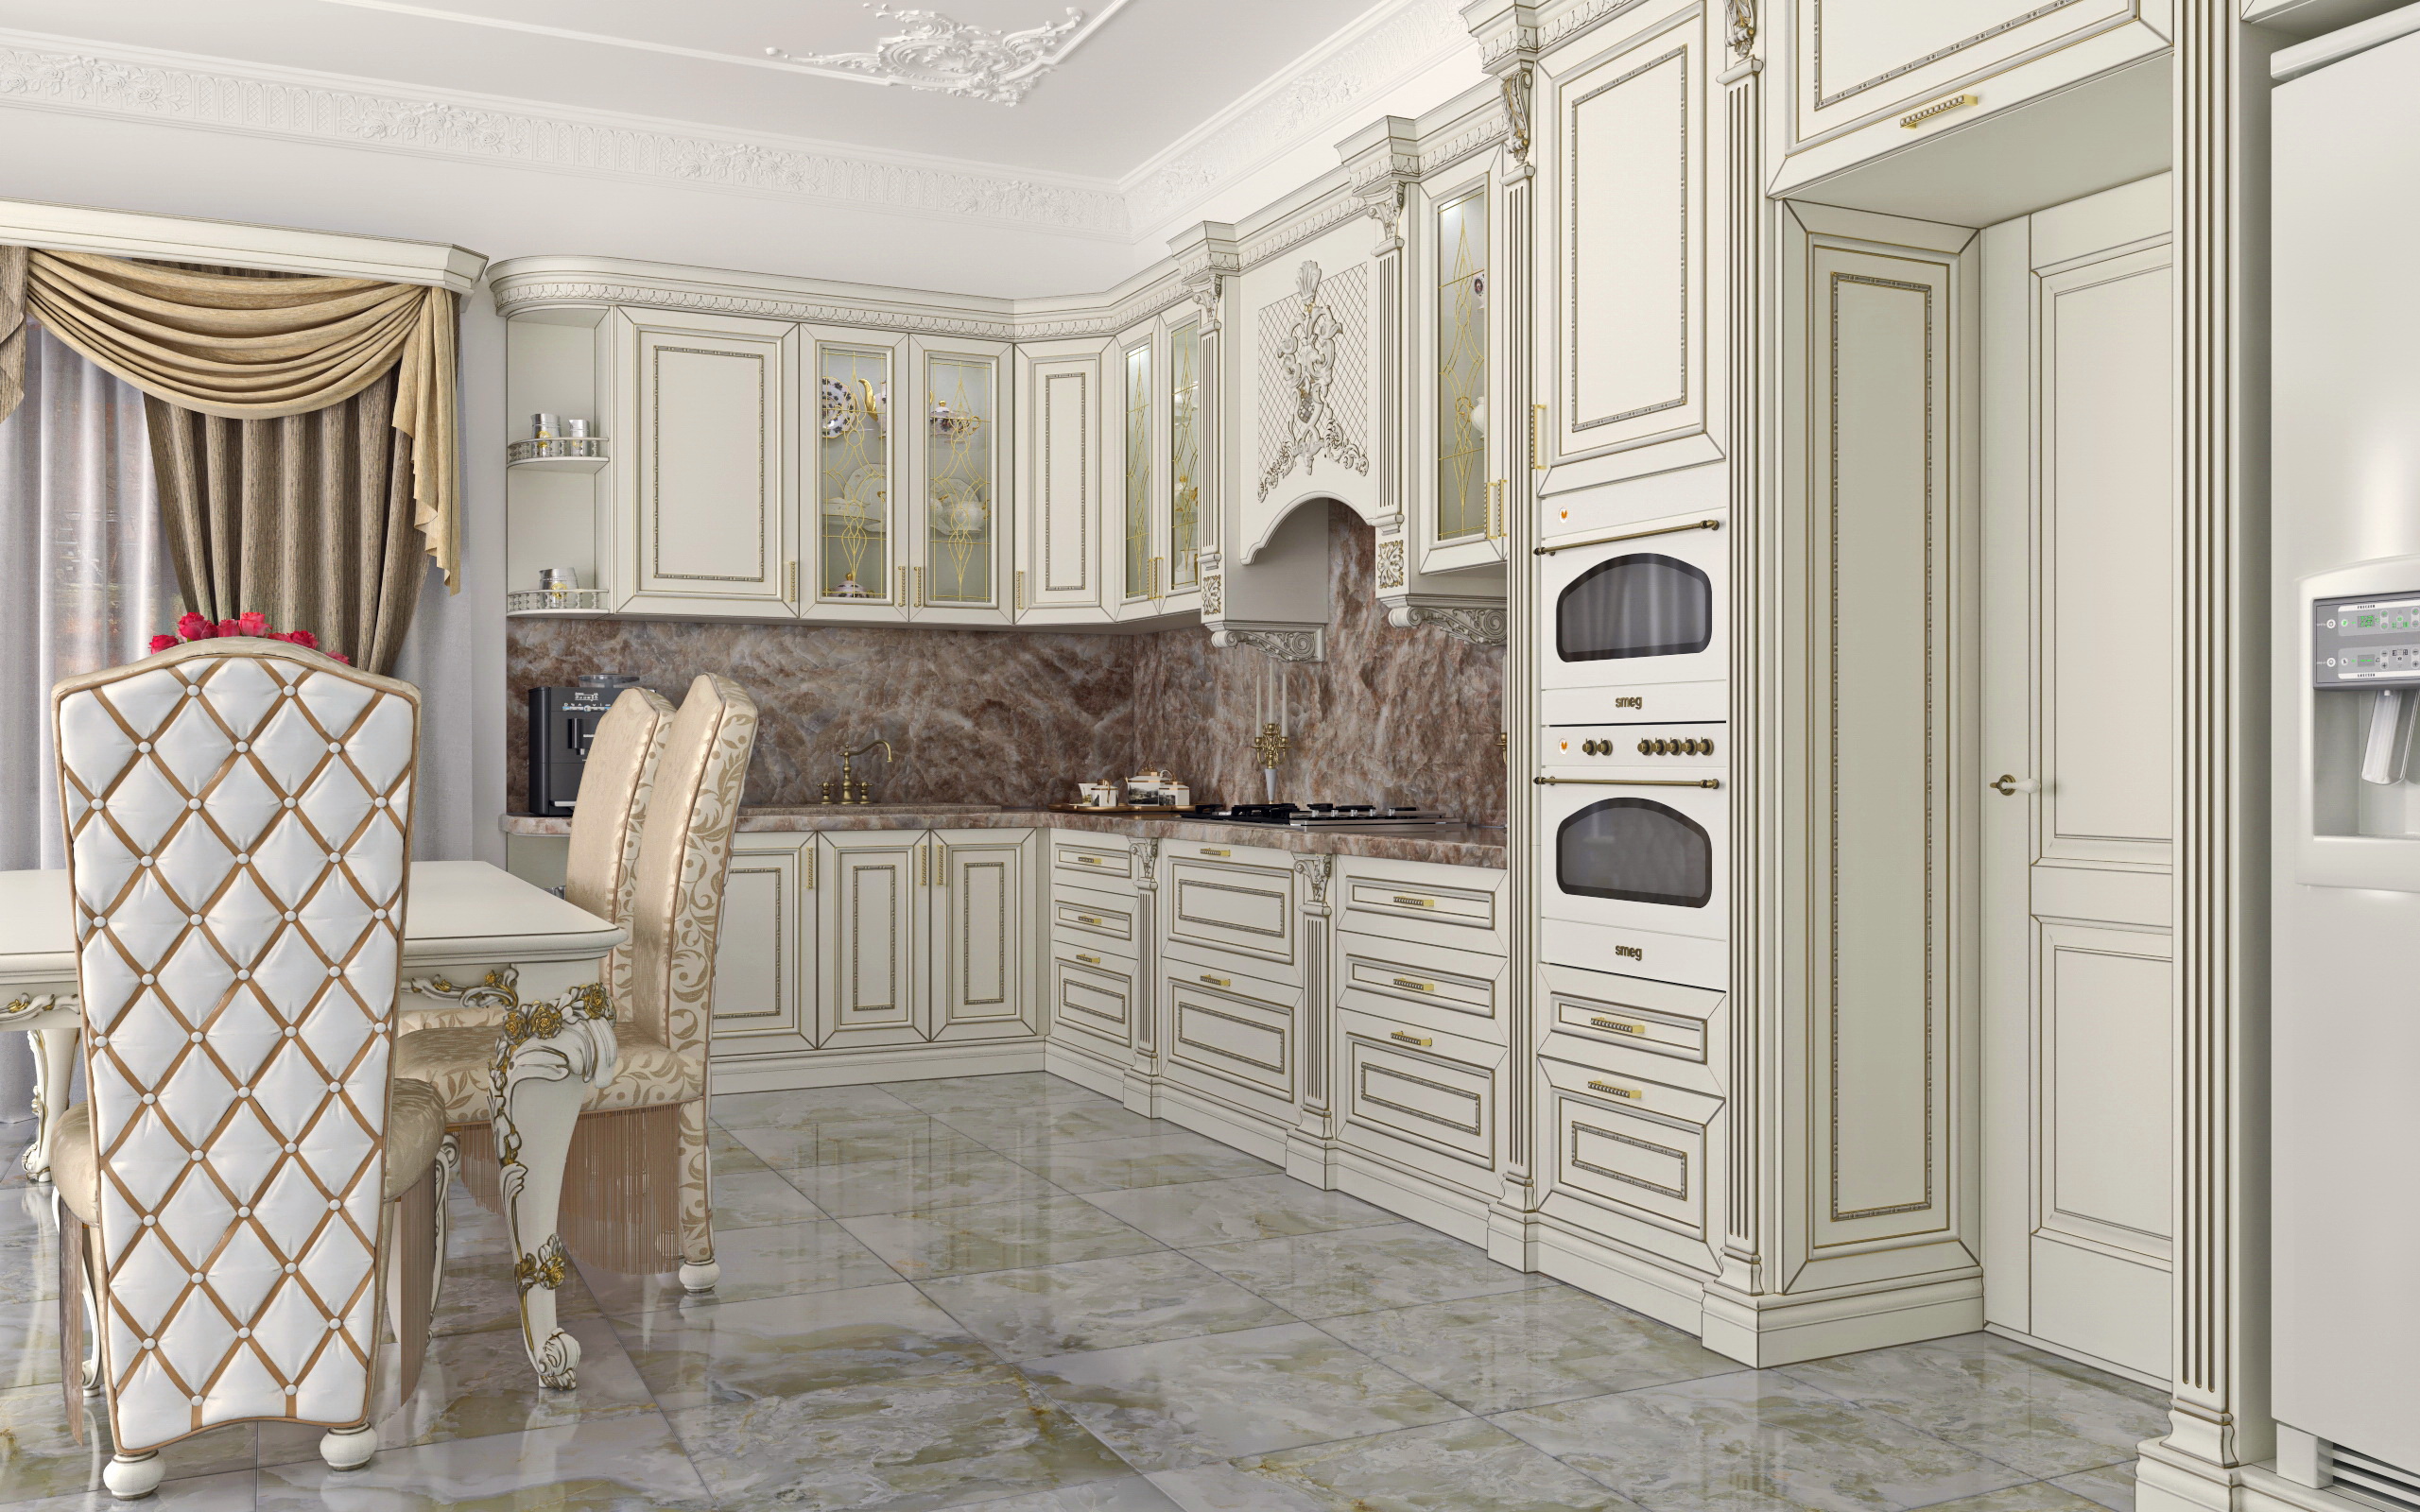 Kitchen-Beautiful house in SolidWorks vray 3.0 image